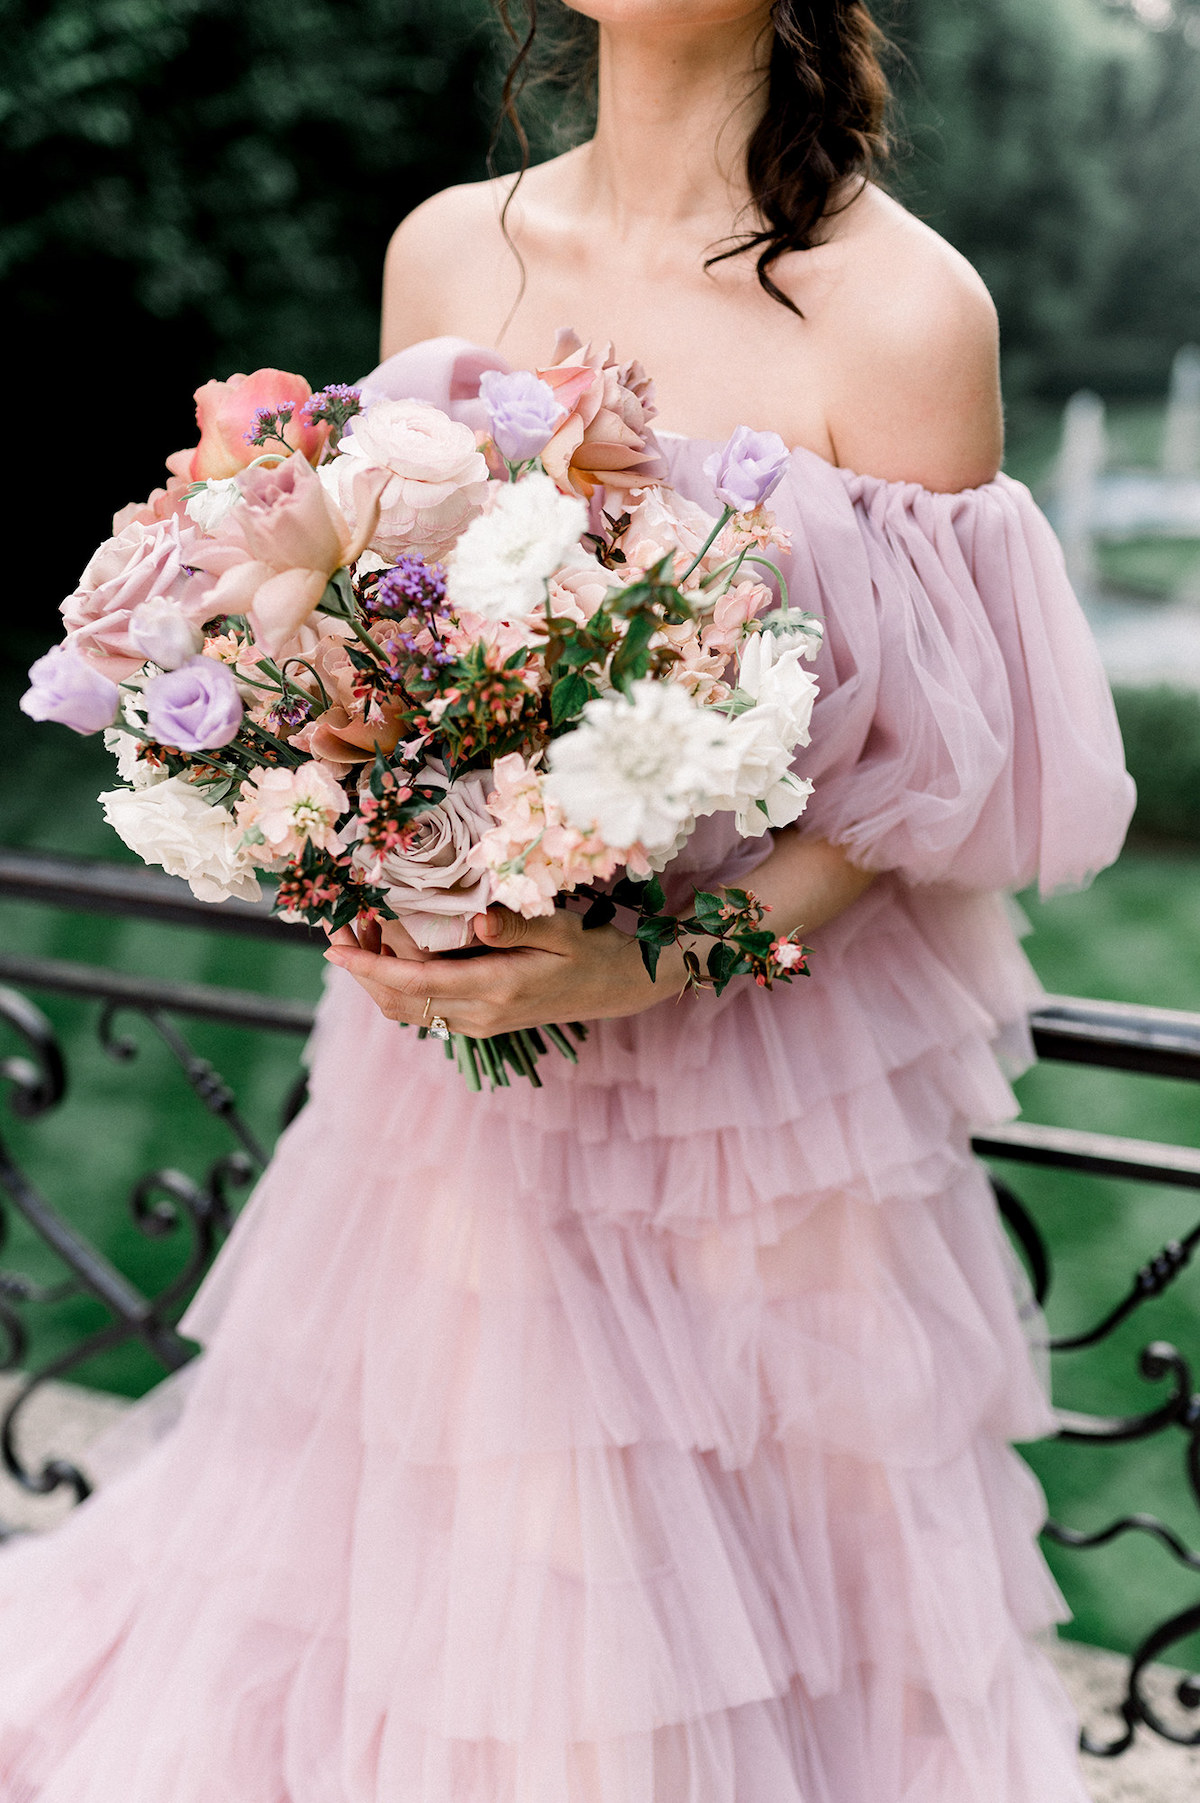 Kristiana Enya's floral artistry on display with a magnificent bouquet, bursting with vibrant colors and textures, adding natural elegance to the editorial.